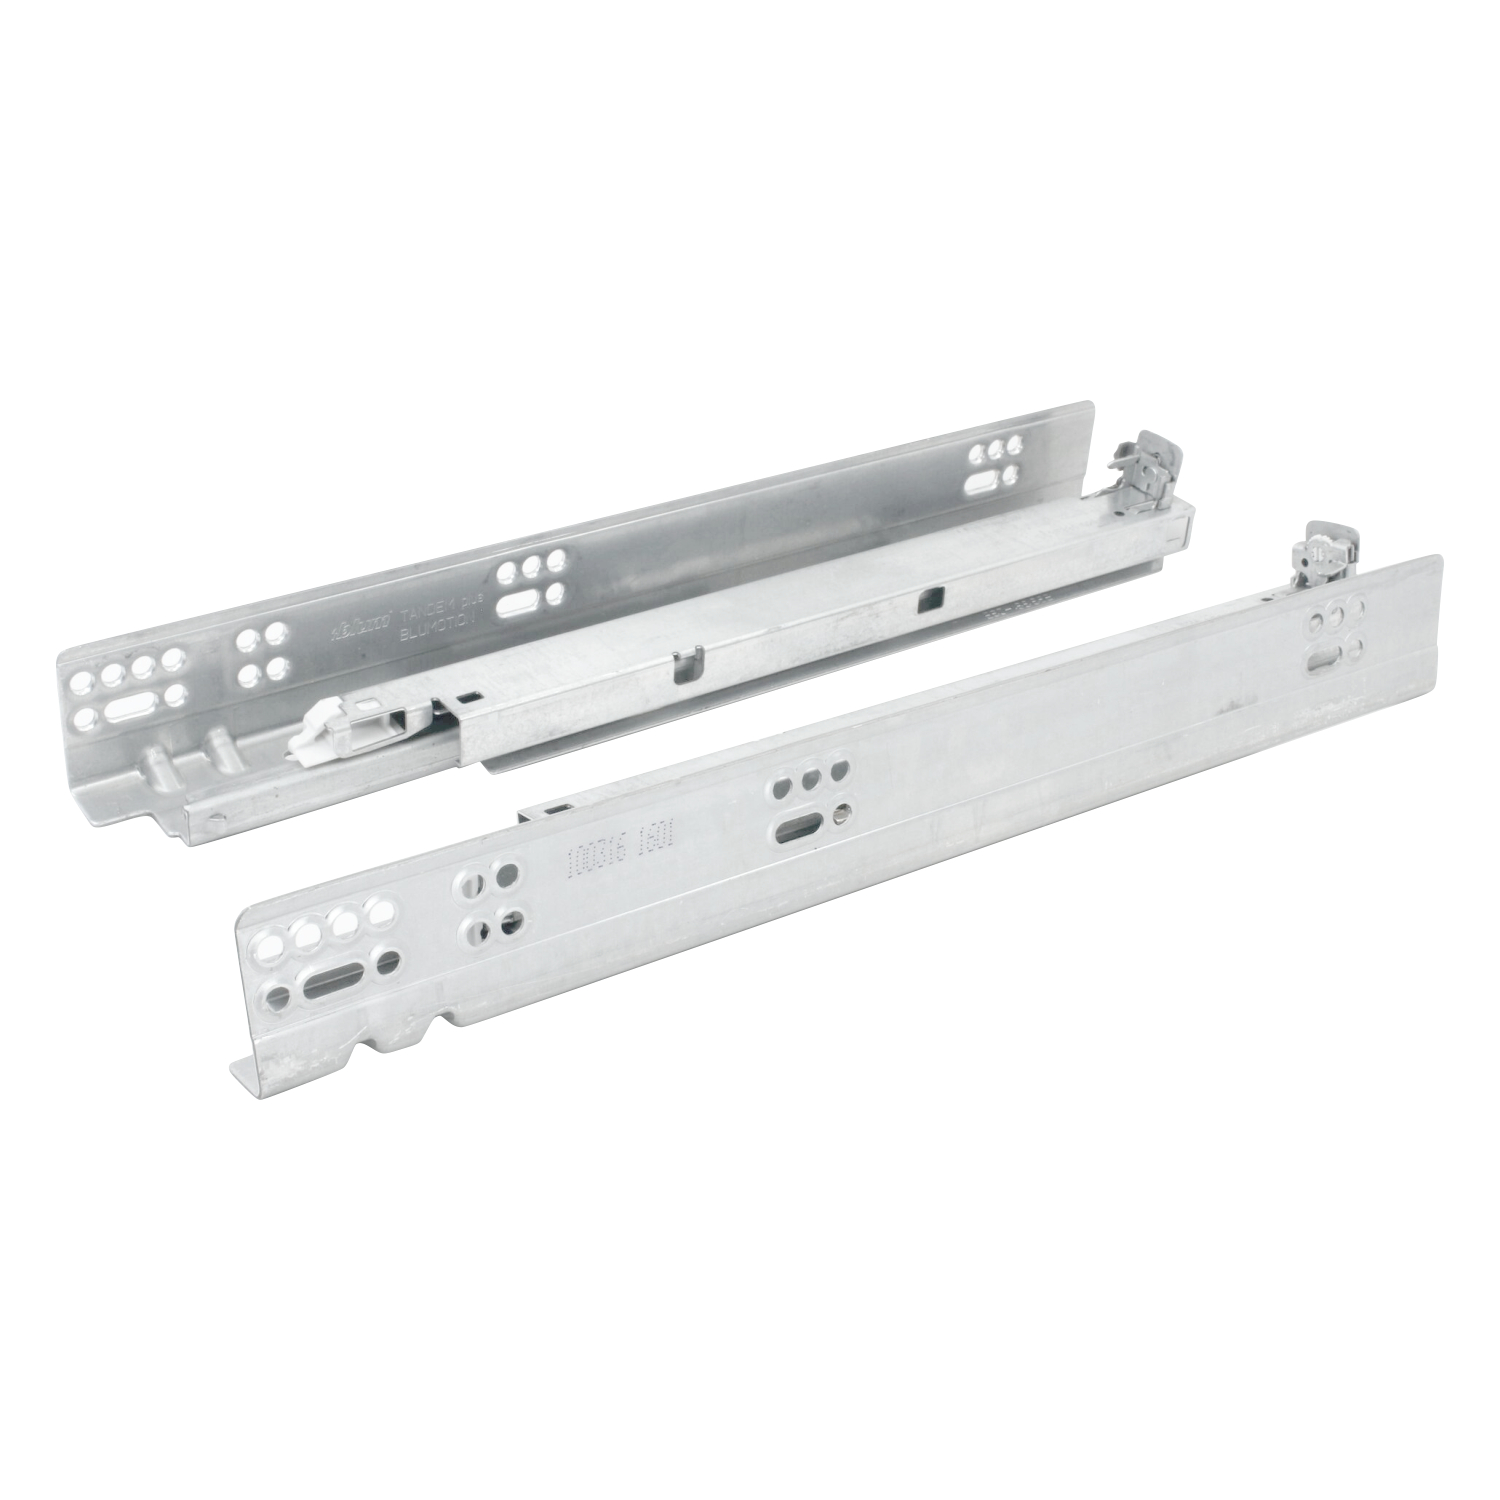 3 Pack Blum 15" Undermount Tandem 563F Drawer Slides + Blumotion Soft Close for Max 3/4" Thick Drawer Boxes - image 1 of 1